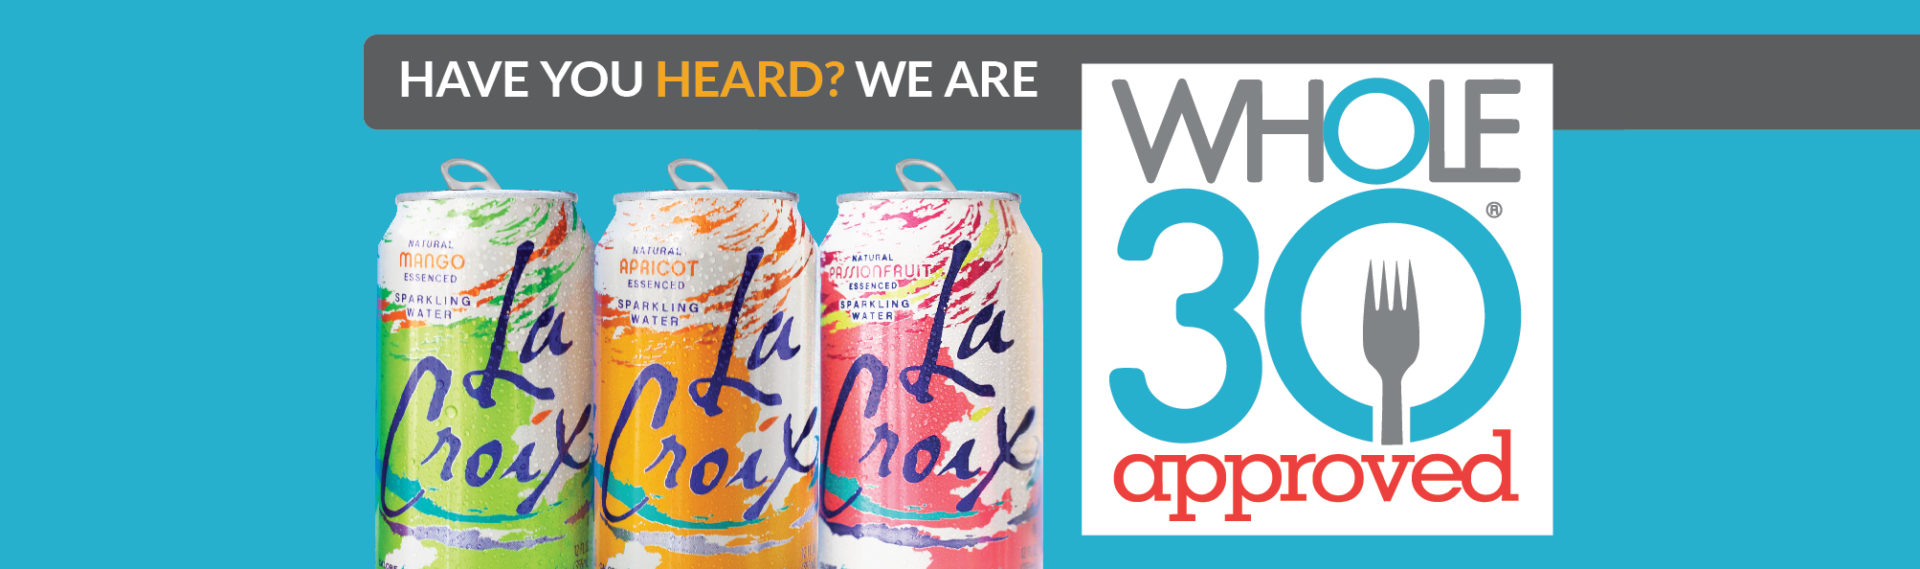 Whole30 names LaCroix Water new partner in health